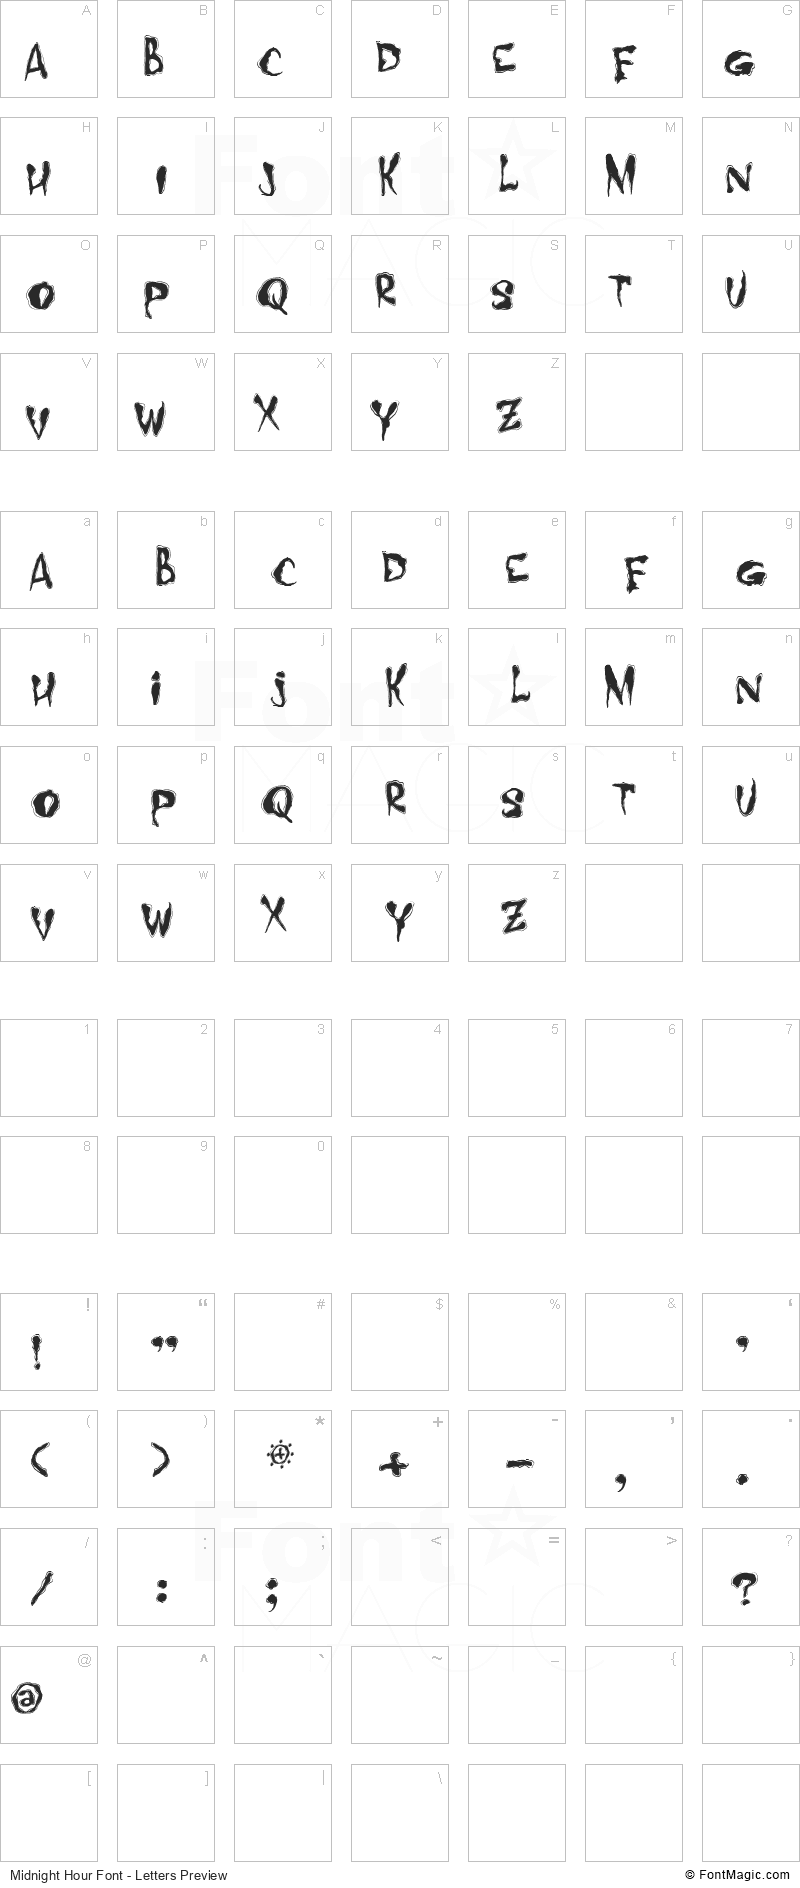 Midnight Hour Font - All Latters Preview Chart